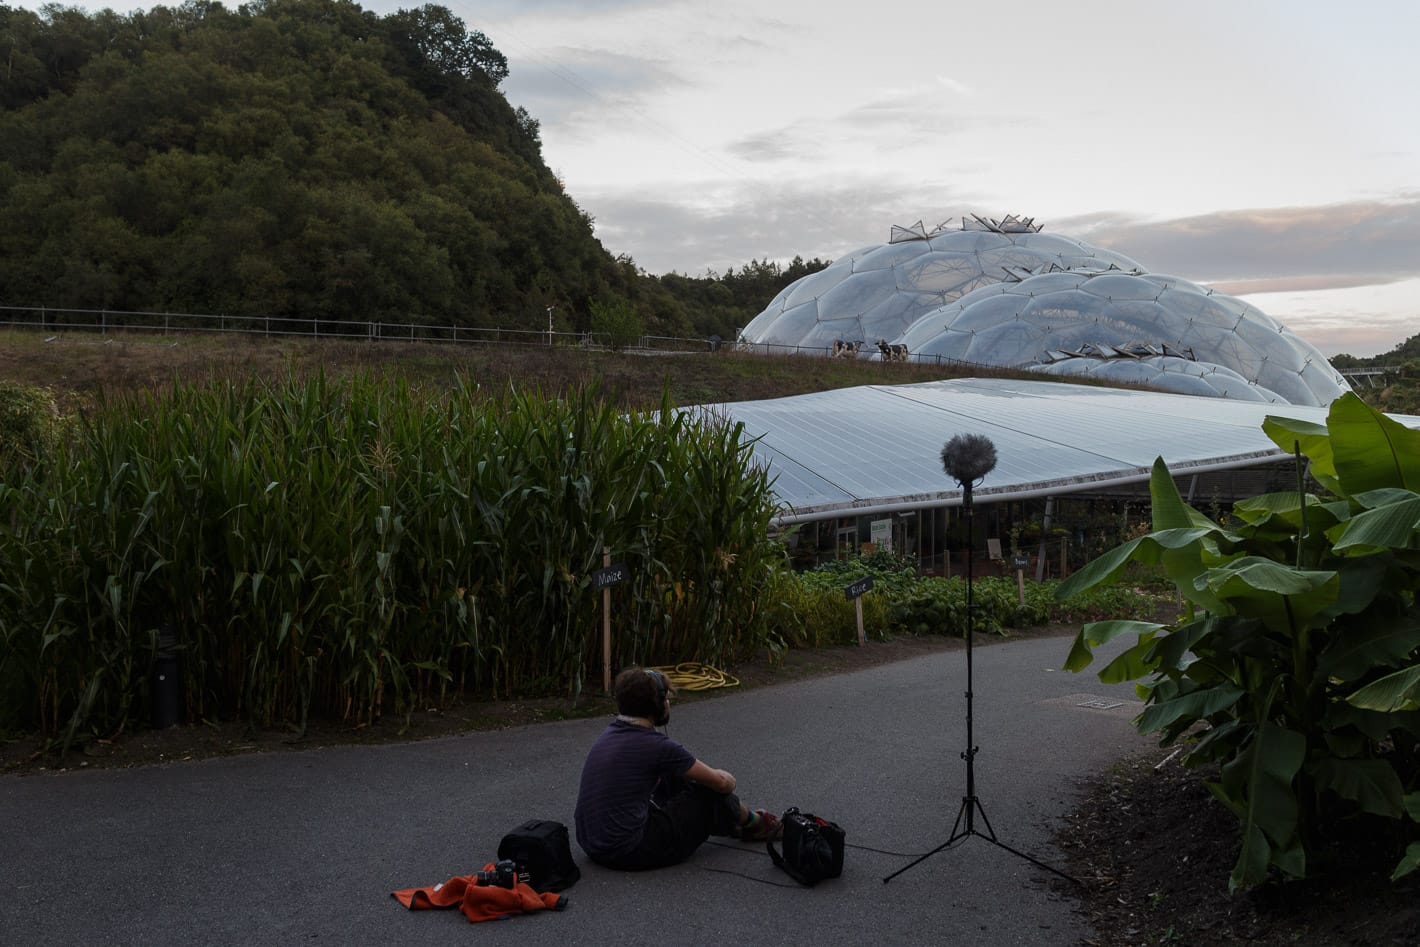 recording the organism that is Eden Project in its moment of exhaling